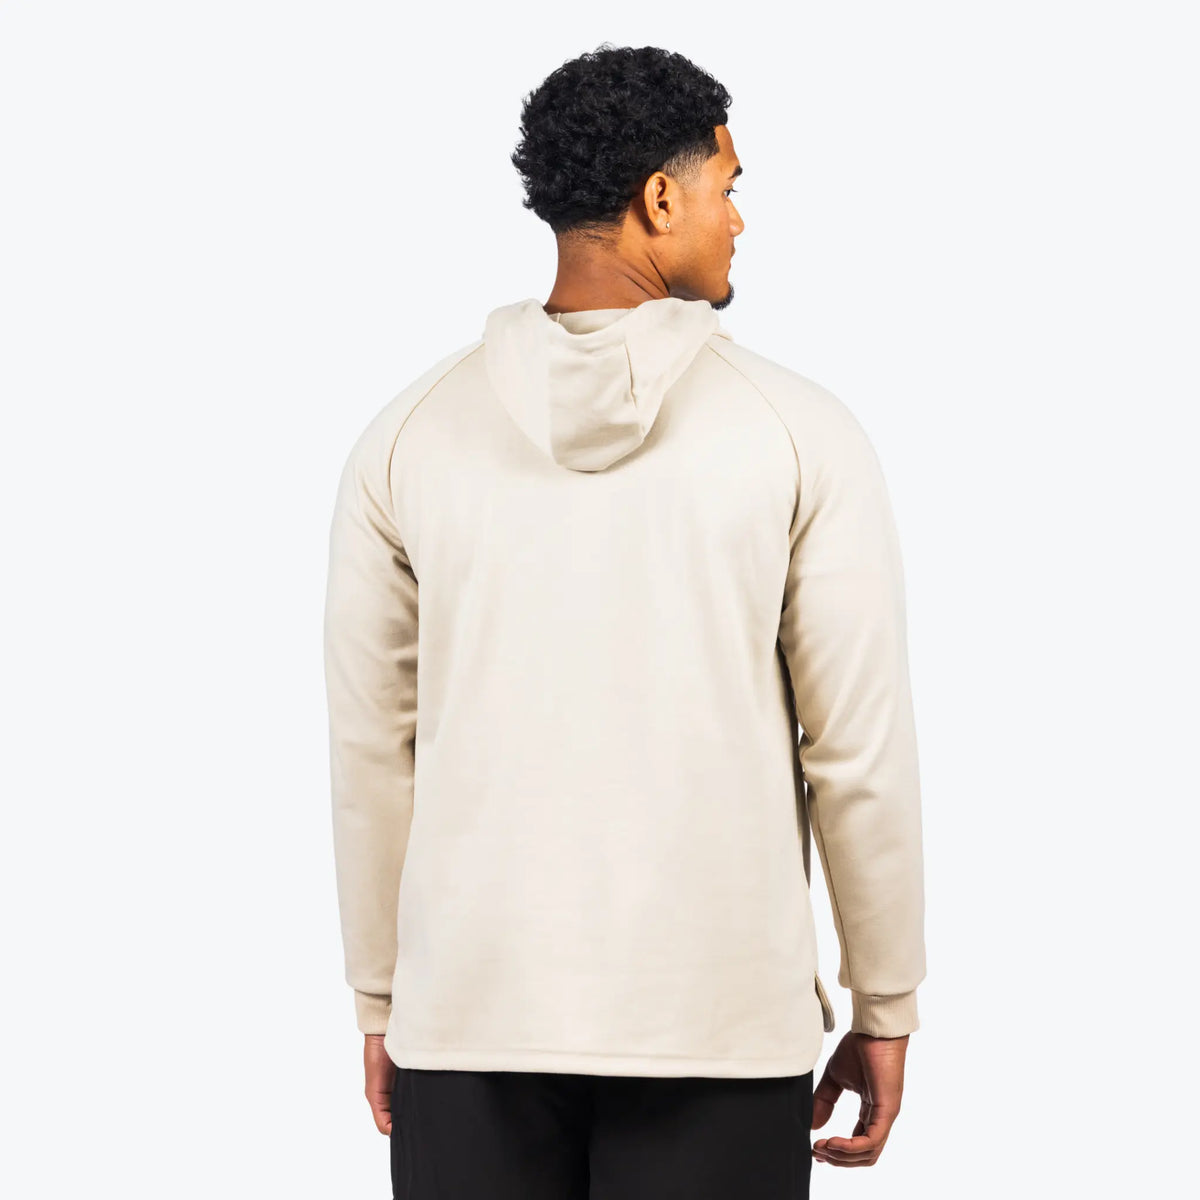 The image shows the backside view of a person wearing a cream-colored athletic hoodie. The hoodie has long sleeves and is part of a training or athleisure outfit. The individual appears to be looking to the side, and the hoodie seems to have a relaxed and comfortable fit, which is typical for workout or casual wear.